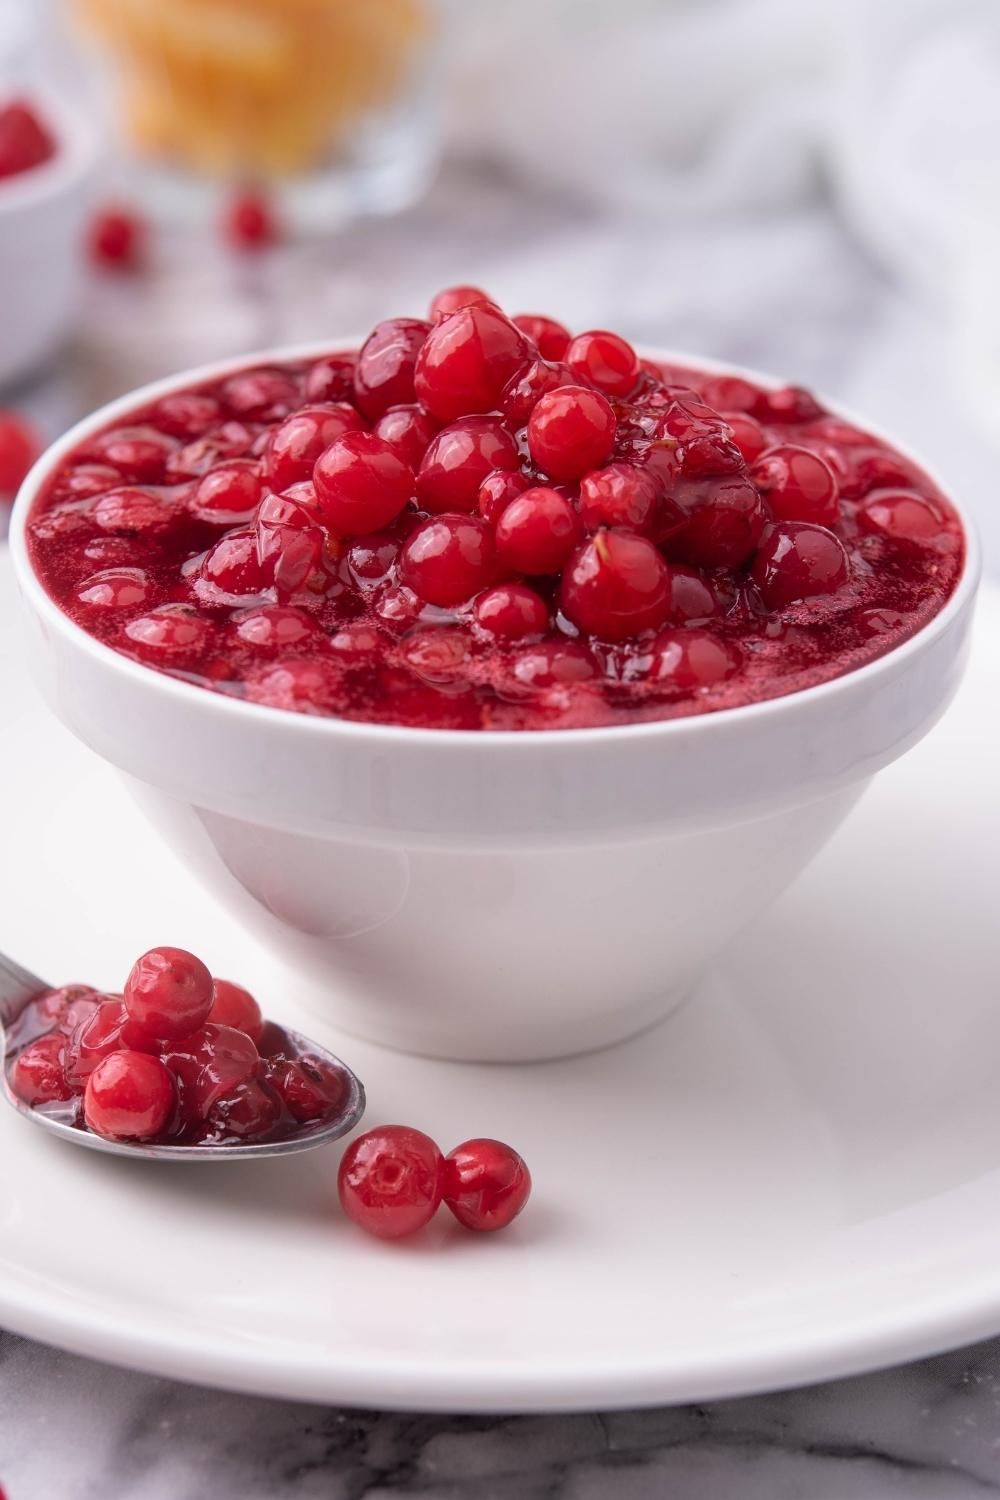 A small serving bowl with cranberry sauce served on a saucer. A heaping spoonful of cranberries sits next to the bowl on the saucer.